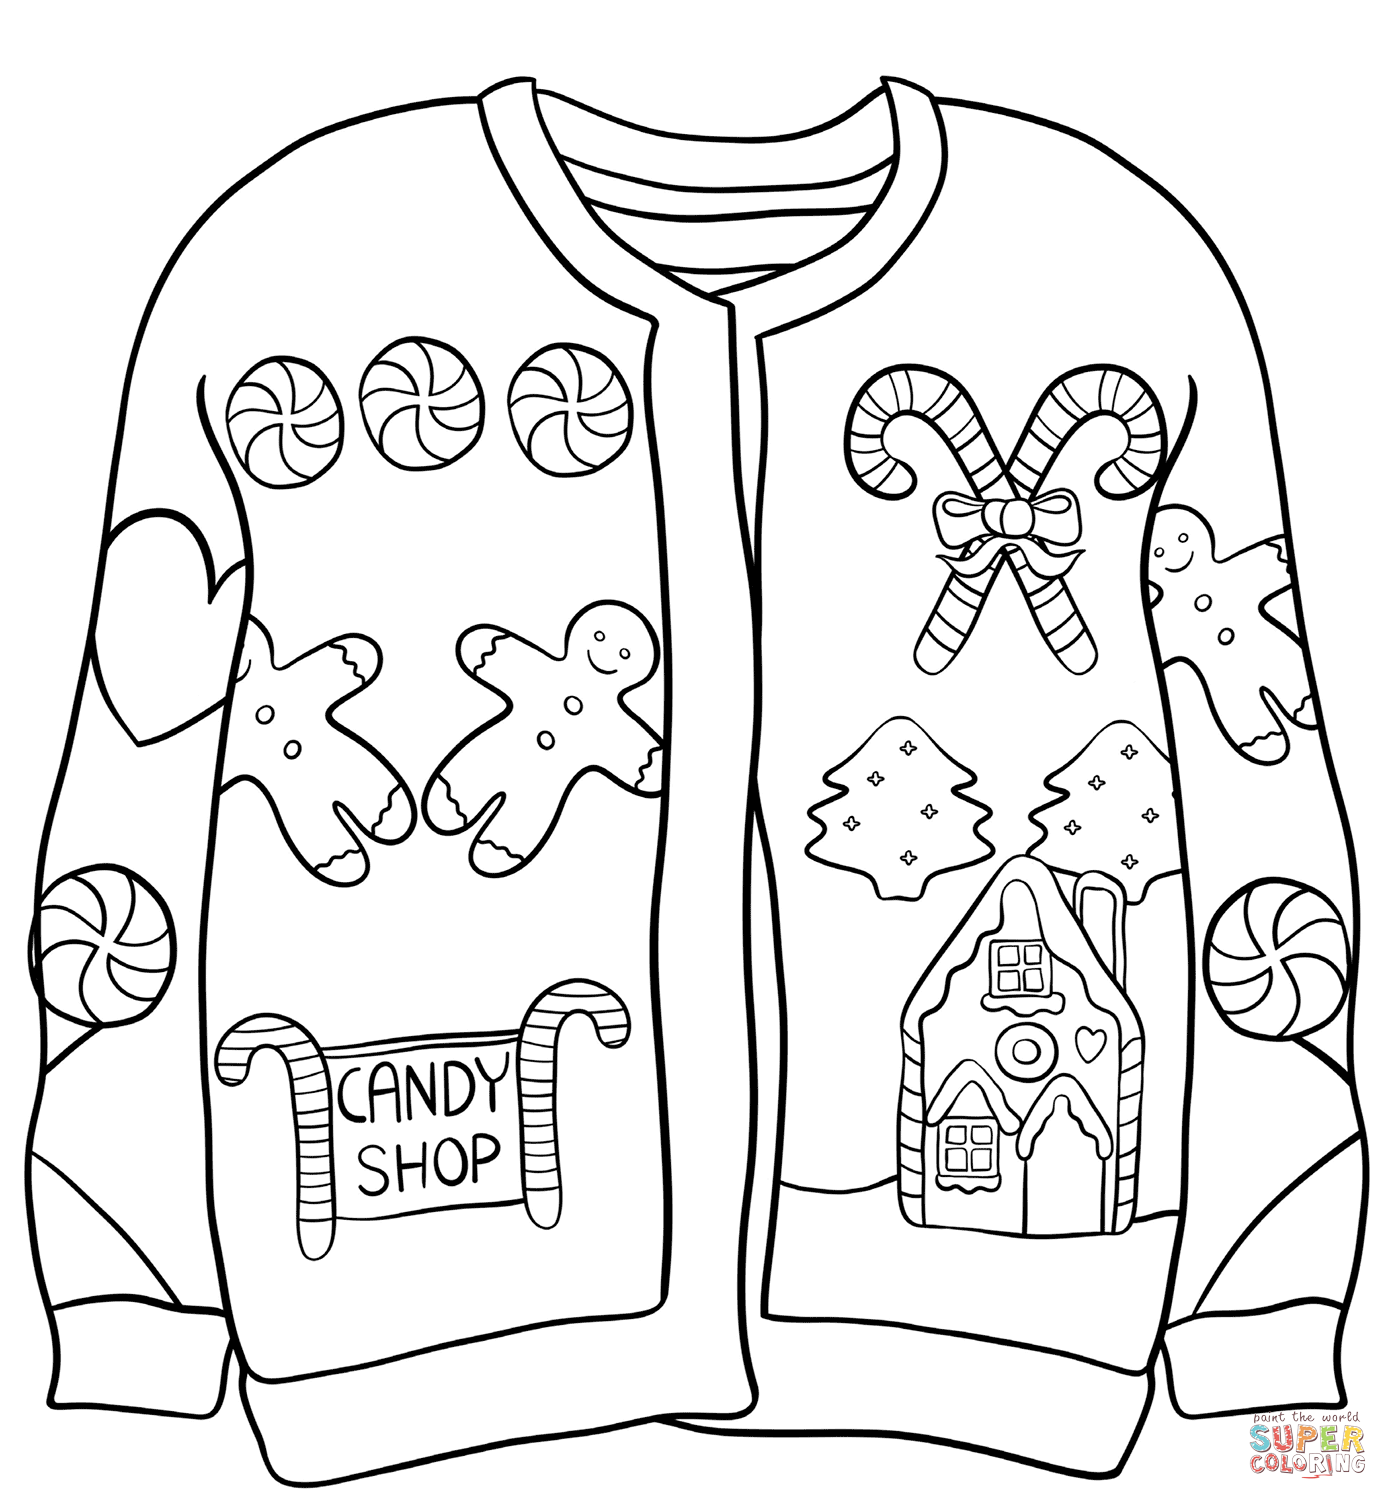 Christmas Sweater with Candy Shop coloring page